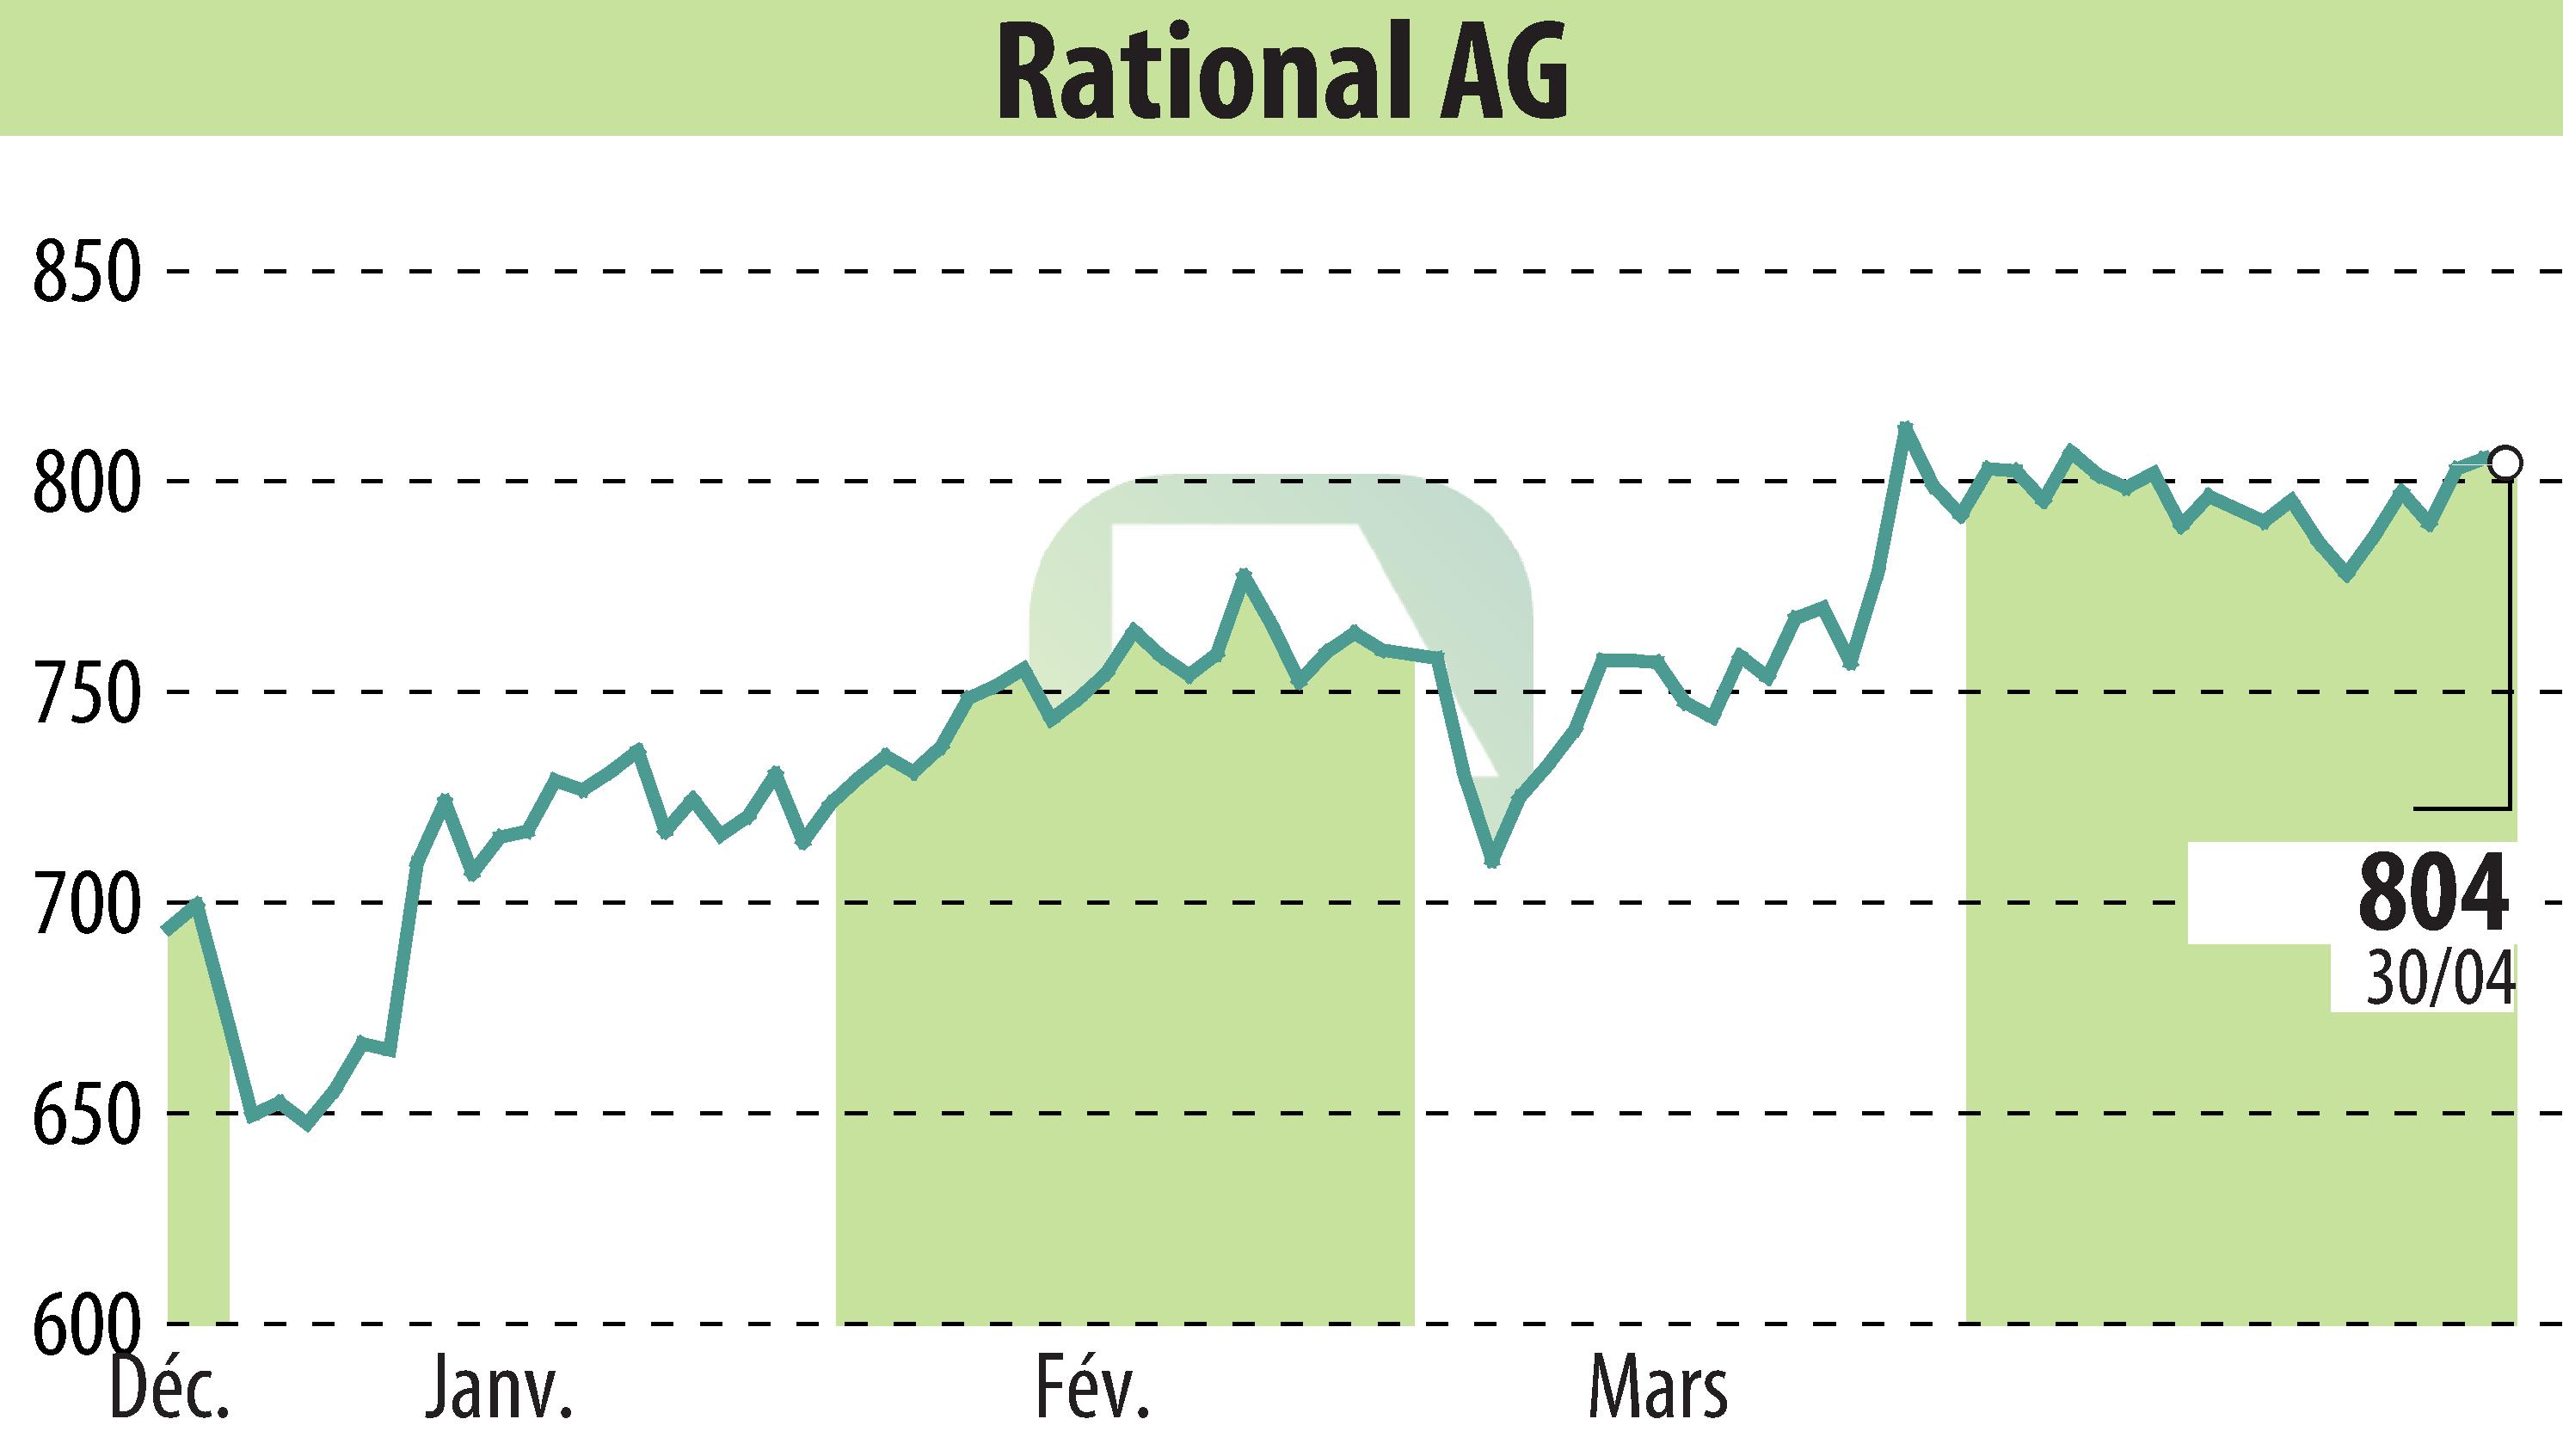 Stock price chart of RATIONAL AG (EBR:RAA) showing fluctuations.